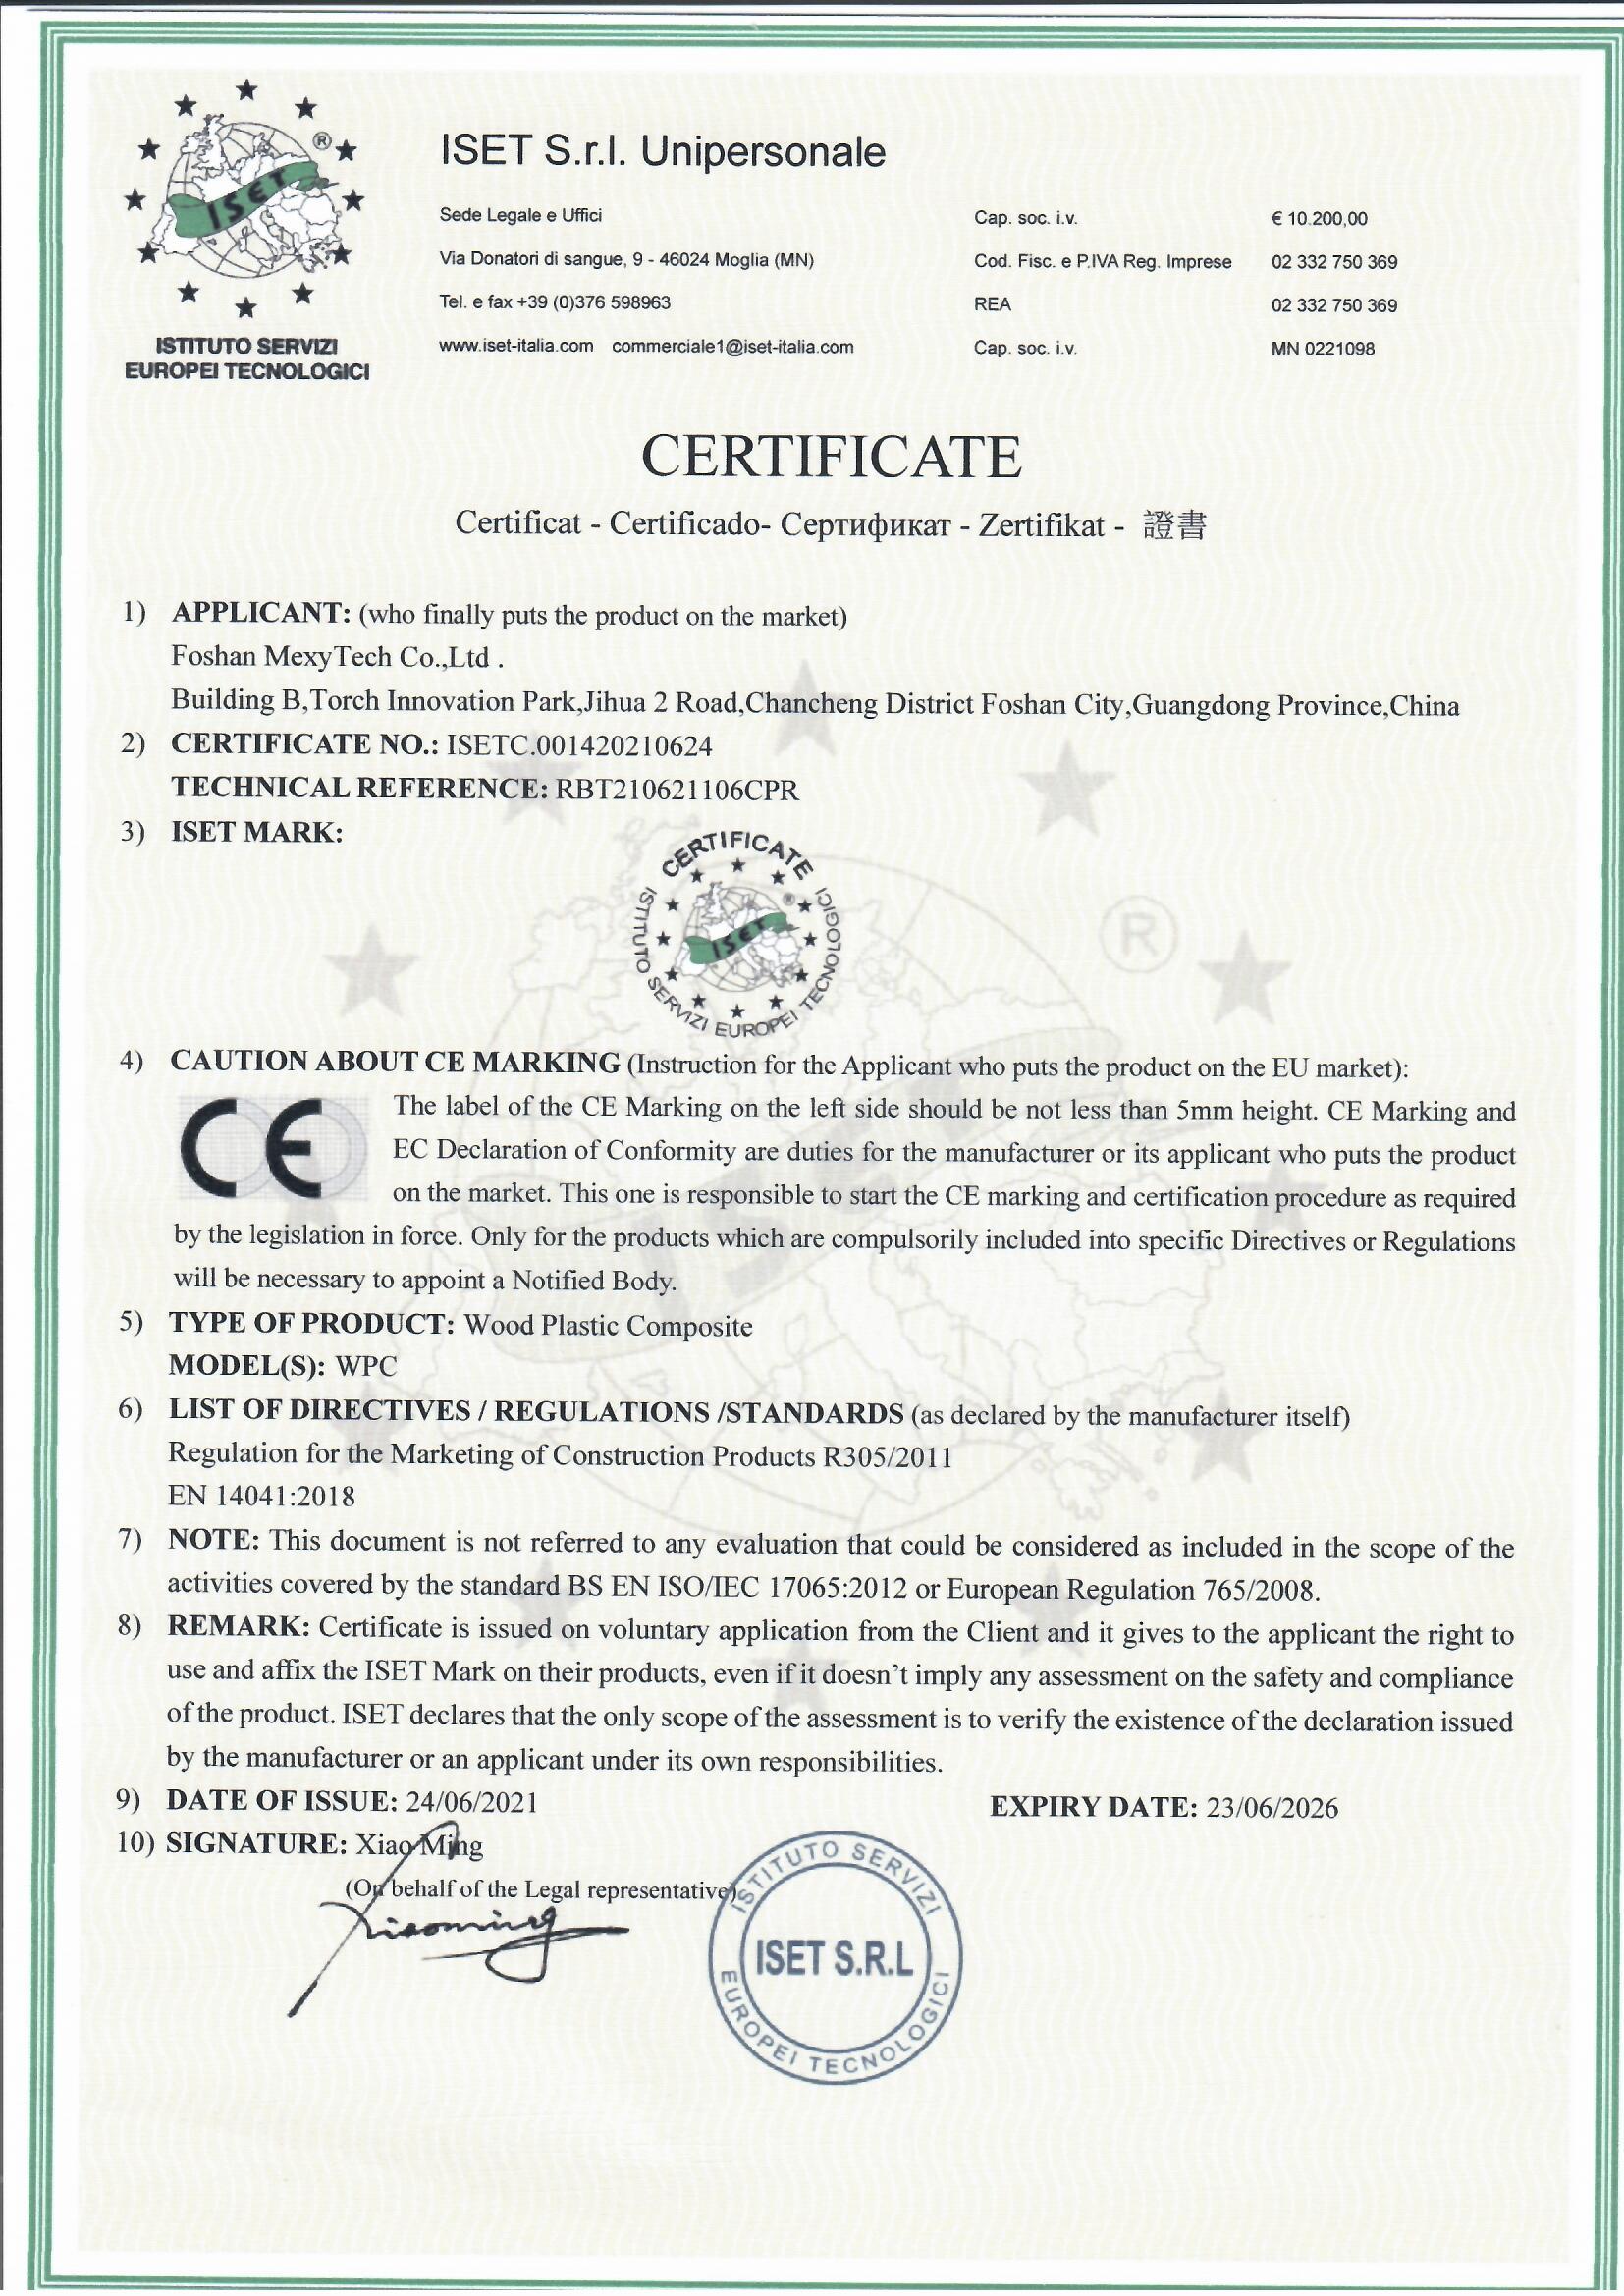 All mexytech wood-plastic products have obtained CE certification